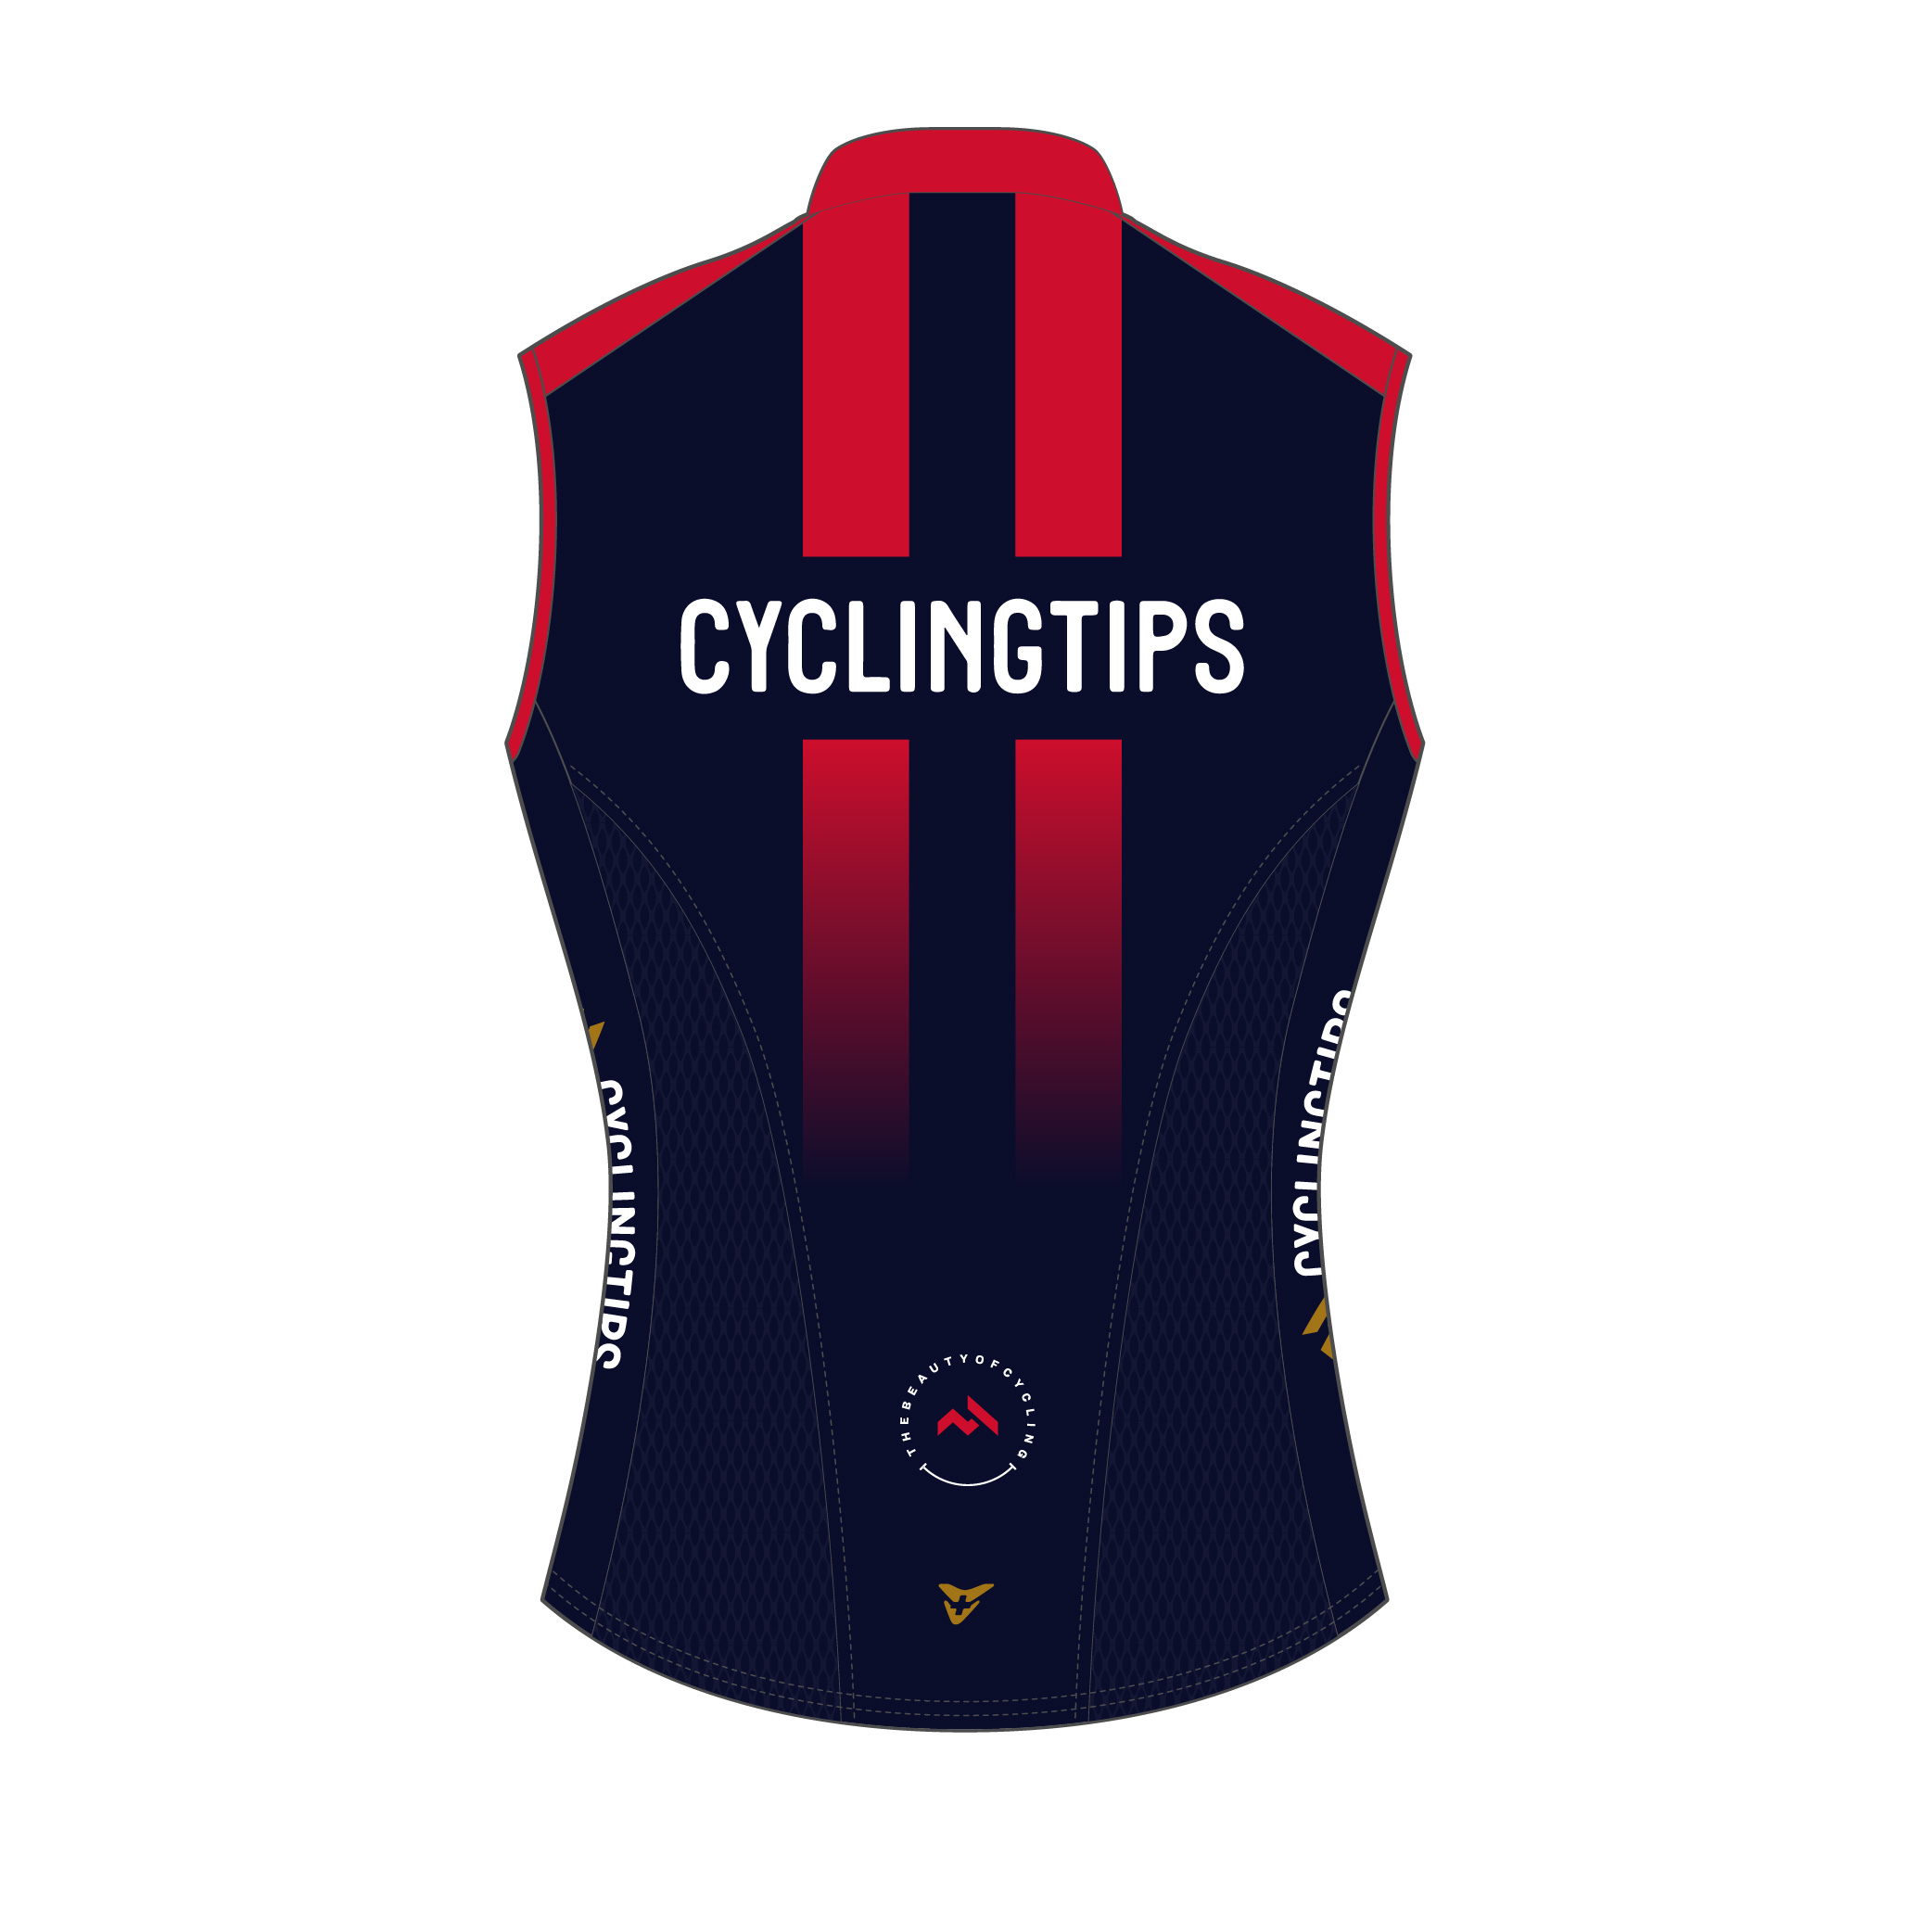 cycling-tips-22-s-53-0614-red-blue-top-back-2.jpg